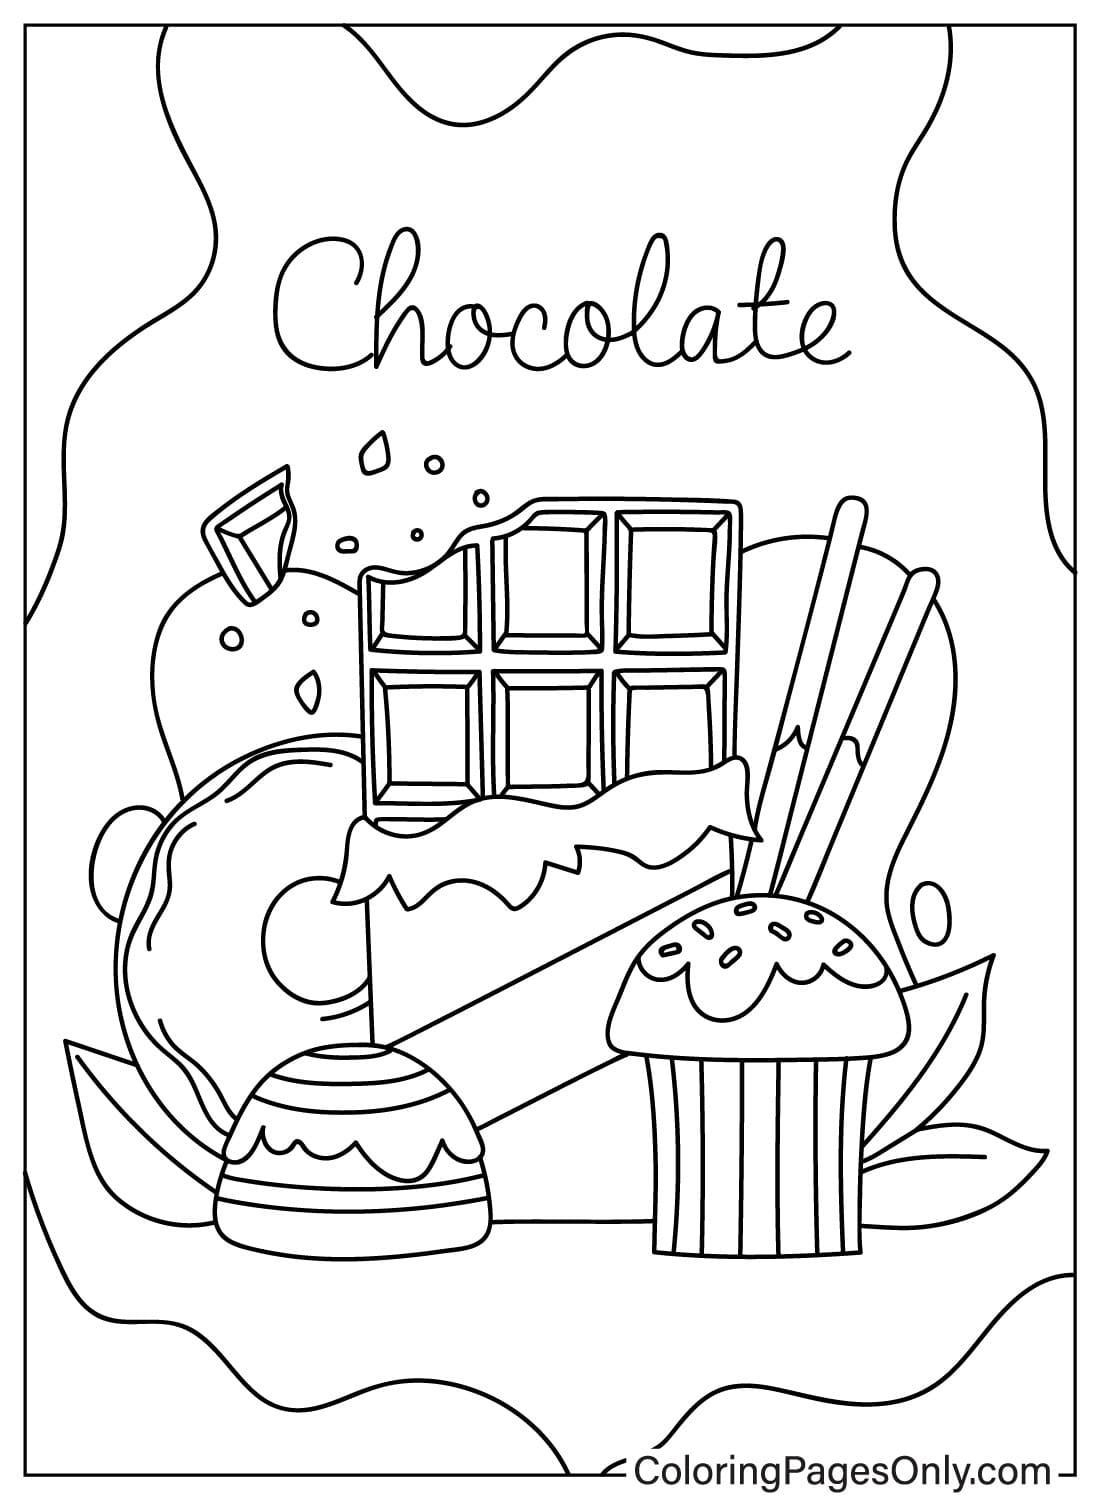 Chocolate Coloring Page Images from Chocolate